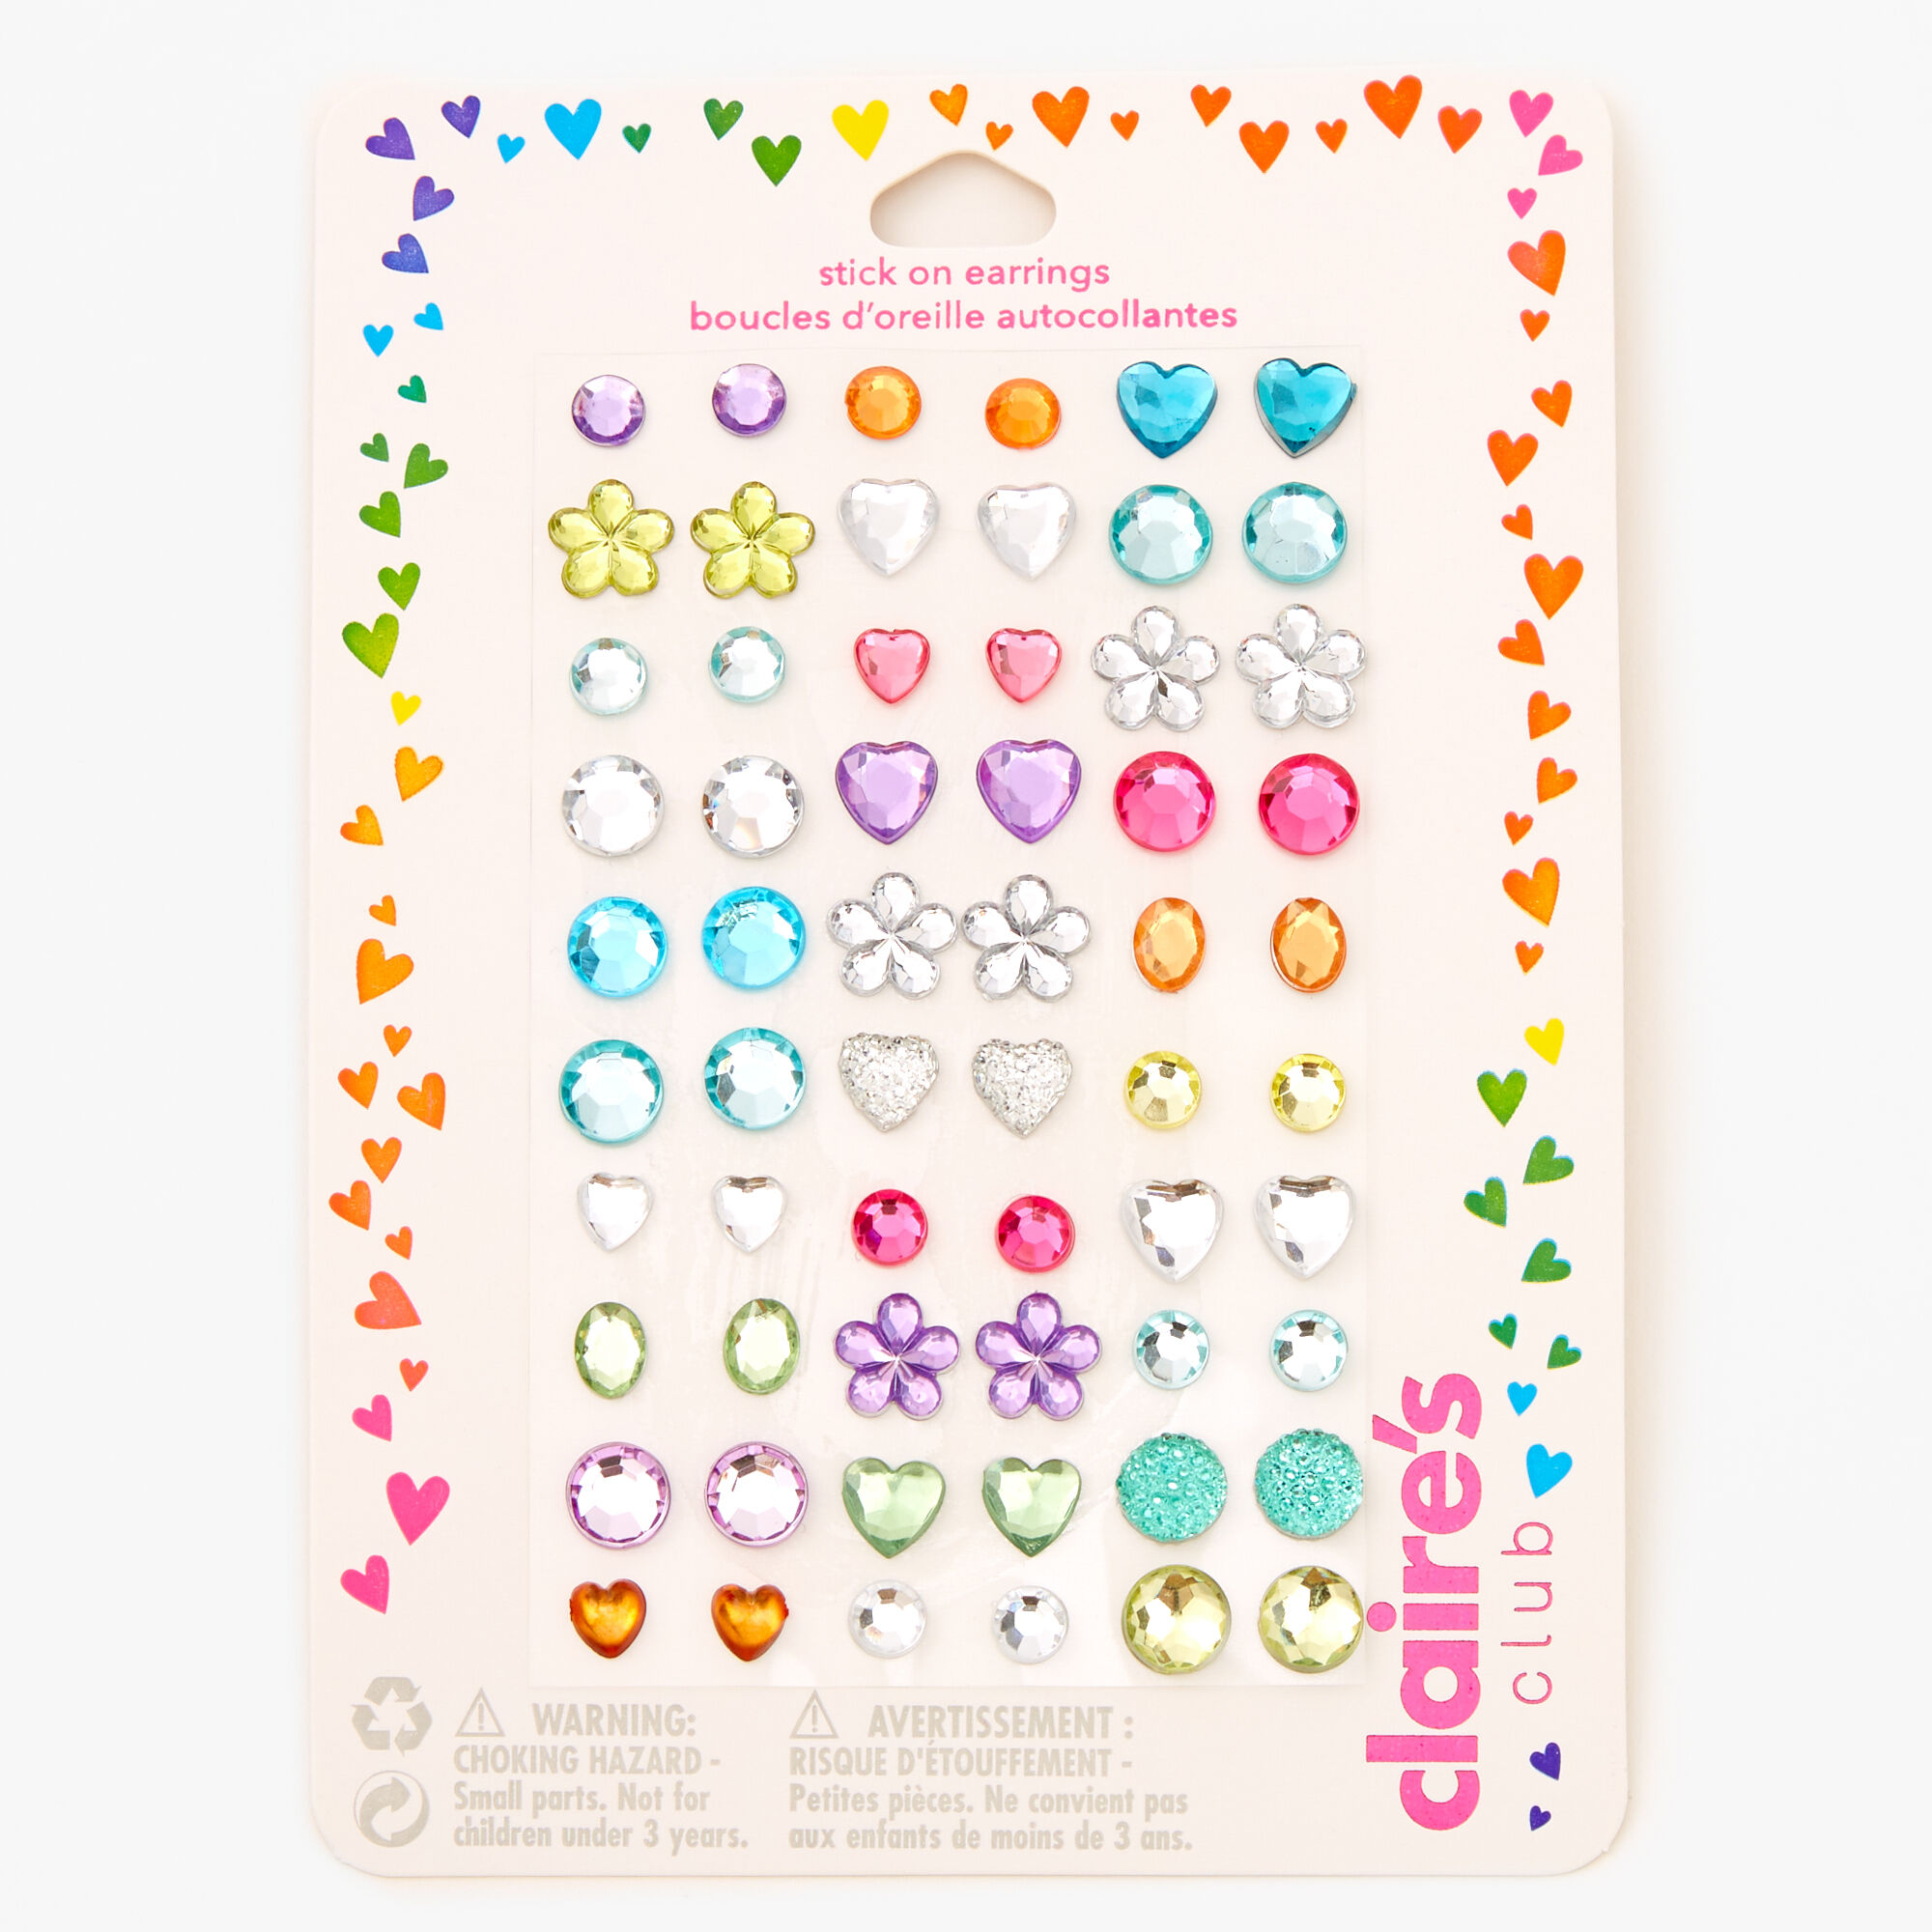 Claire's Club Stick On Earrings Bundle - 3 Pack